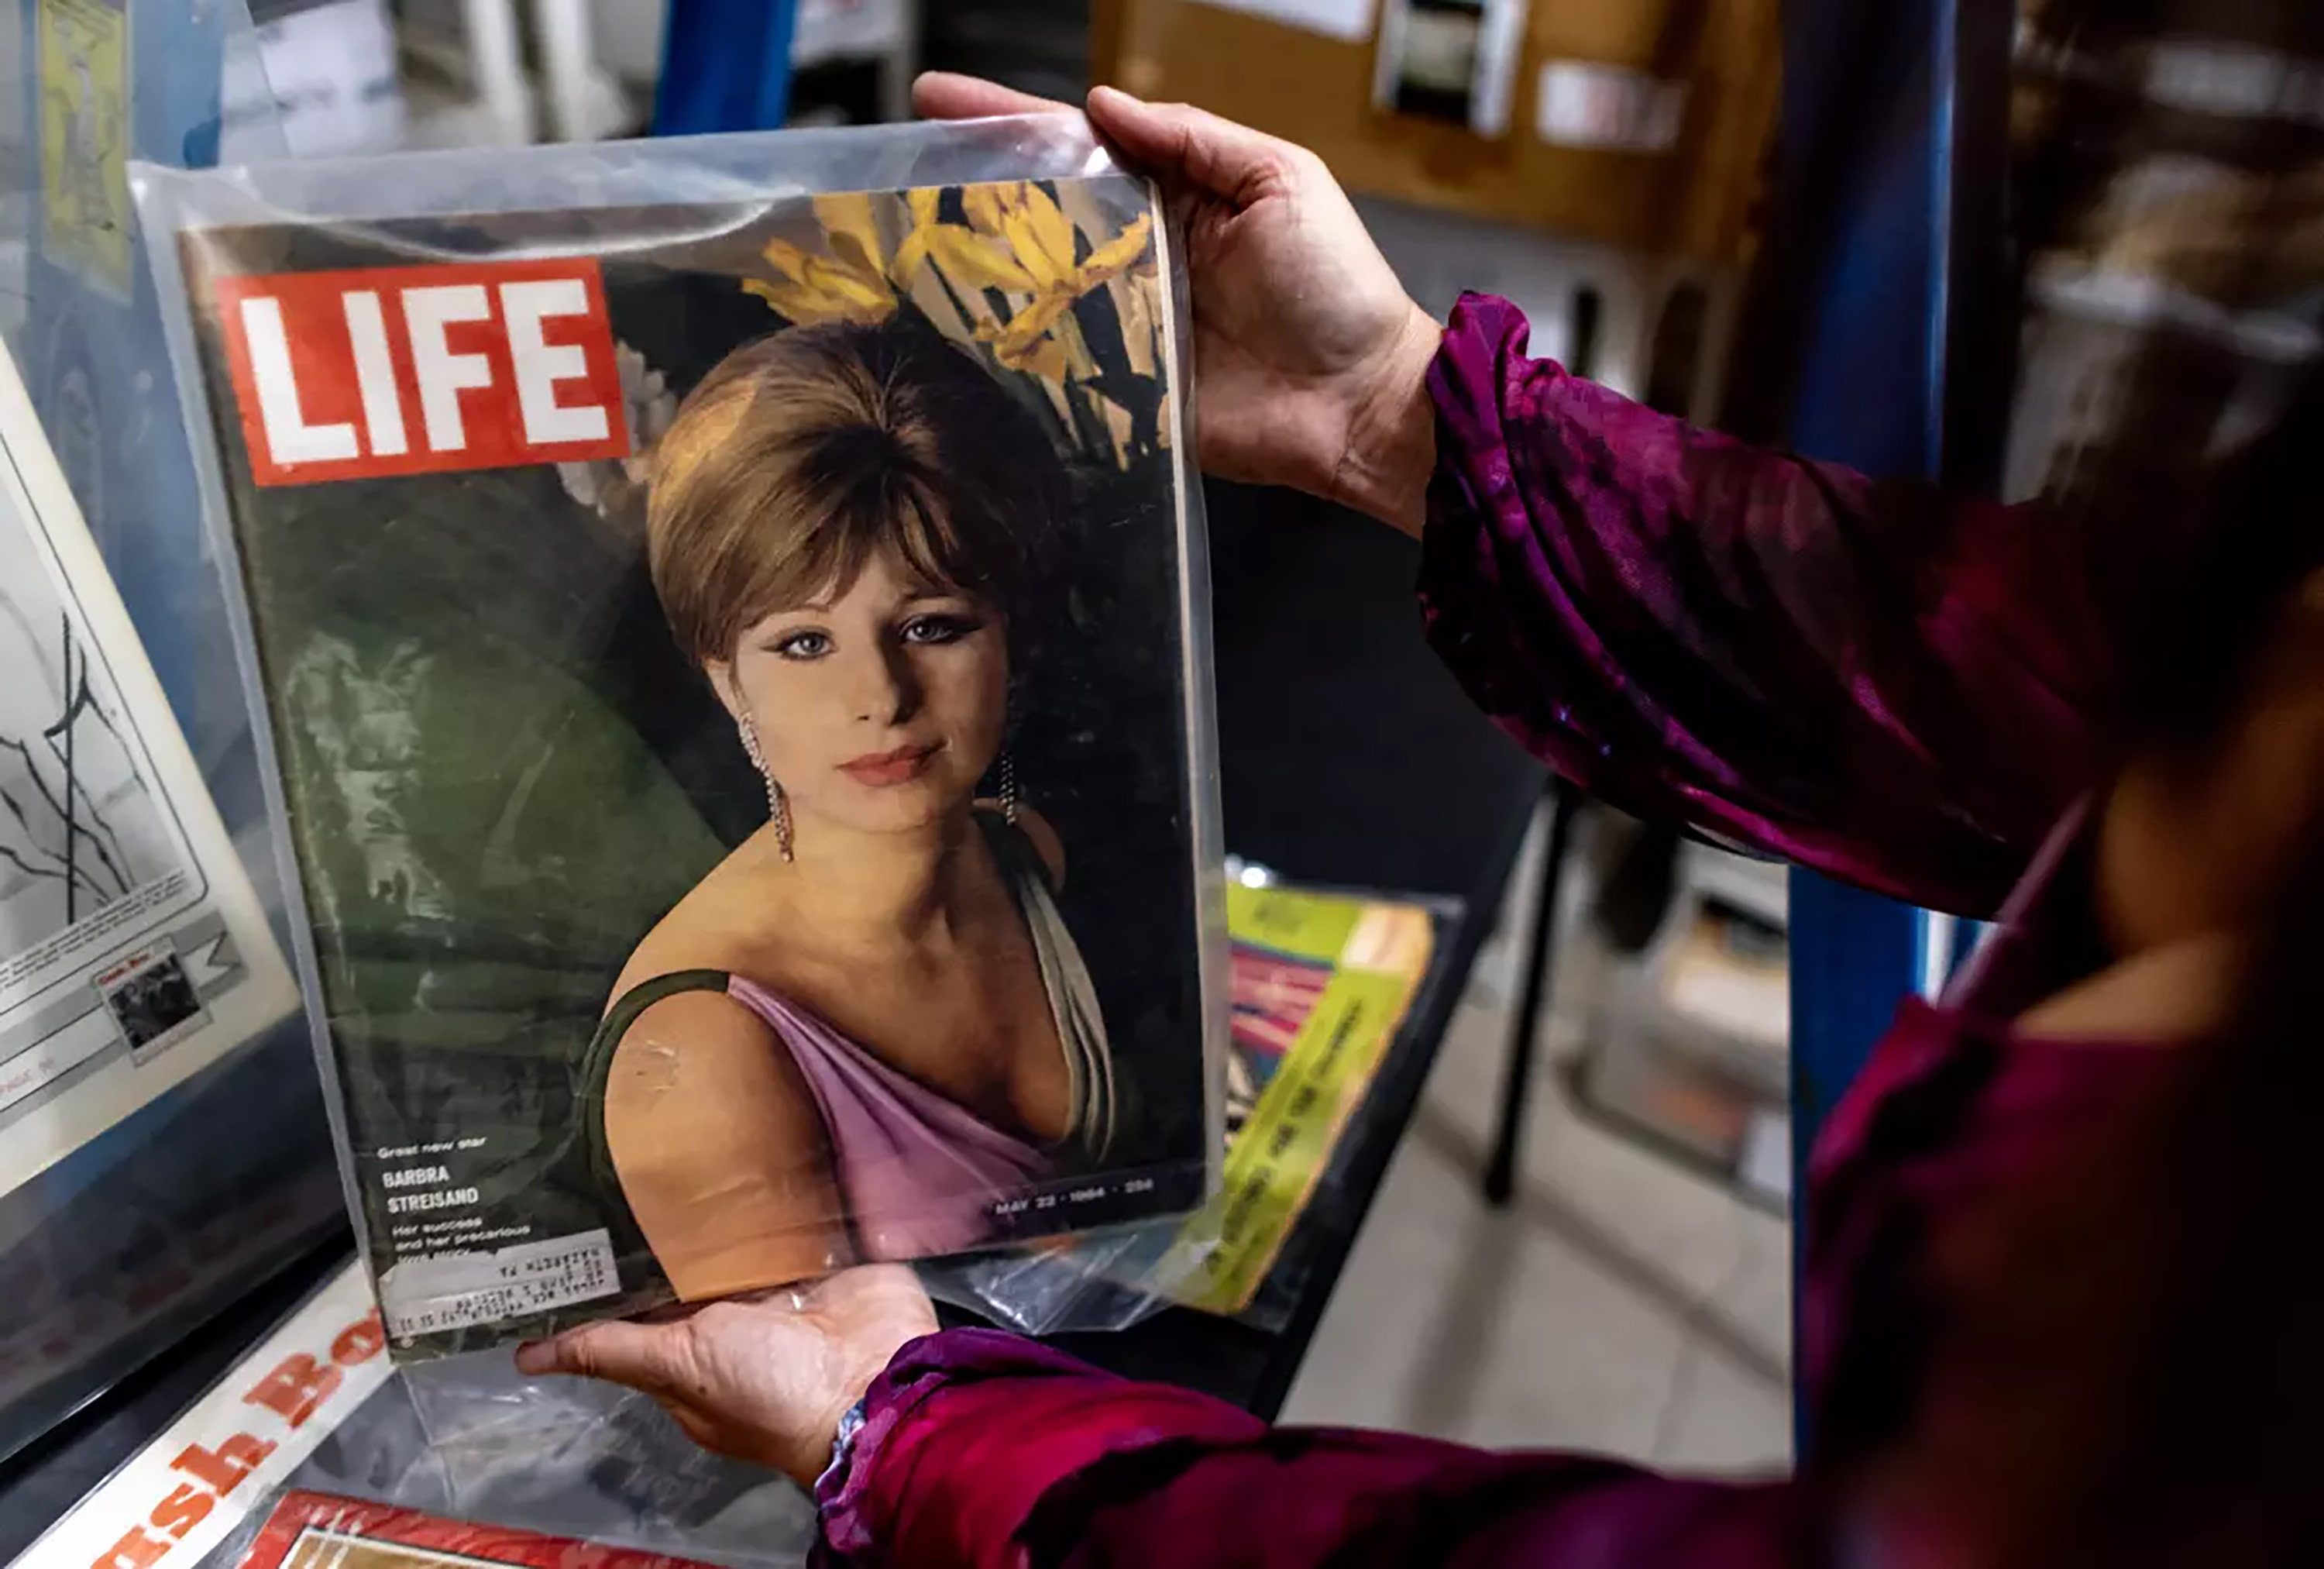 Mara Papalas holds a Life magazine cover featuring Barbra Streisand from May 22, 1964. Photo: Los Angeles Times/TNS